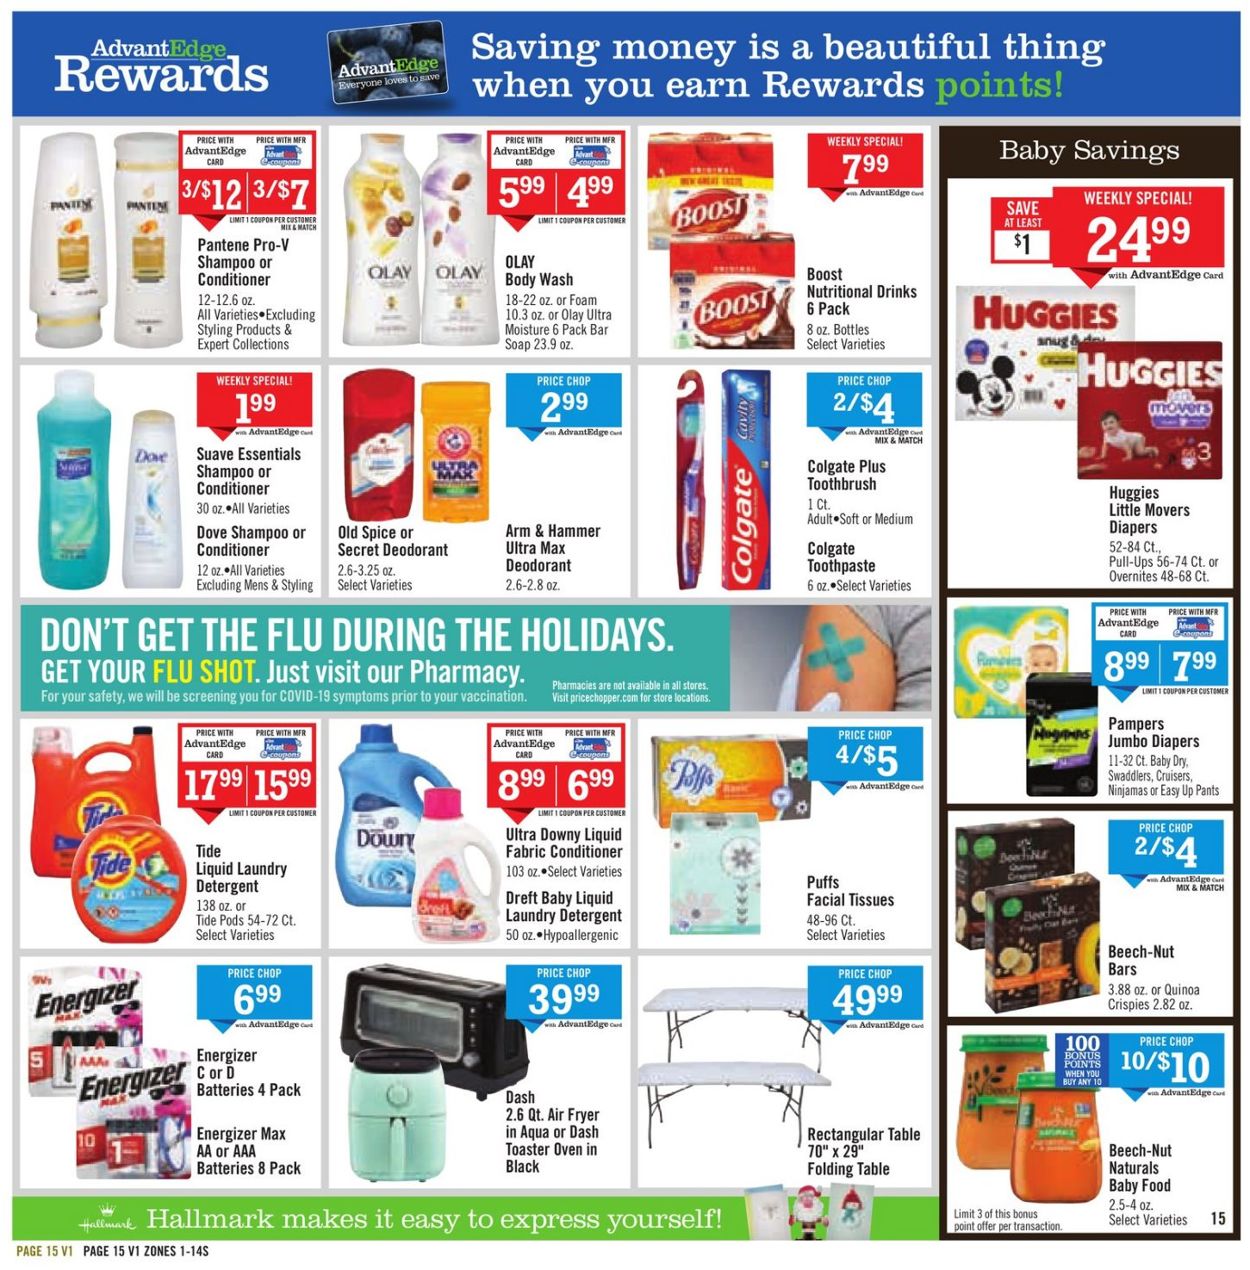 Price Chopper Cyber Monday 2020 Weekly Ad Circular - valid 11/29-12/05/2020 (Page 19)